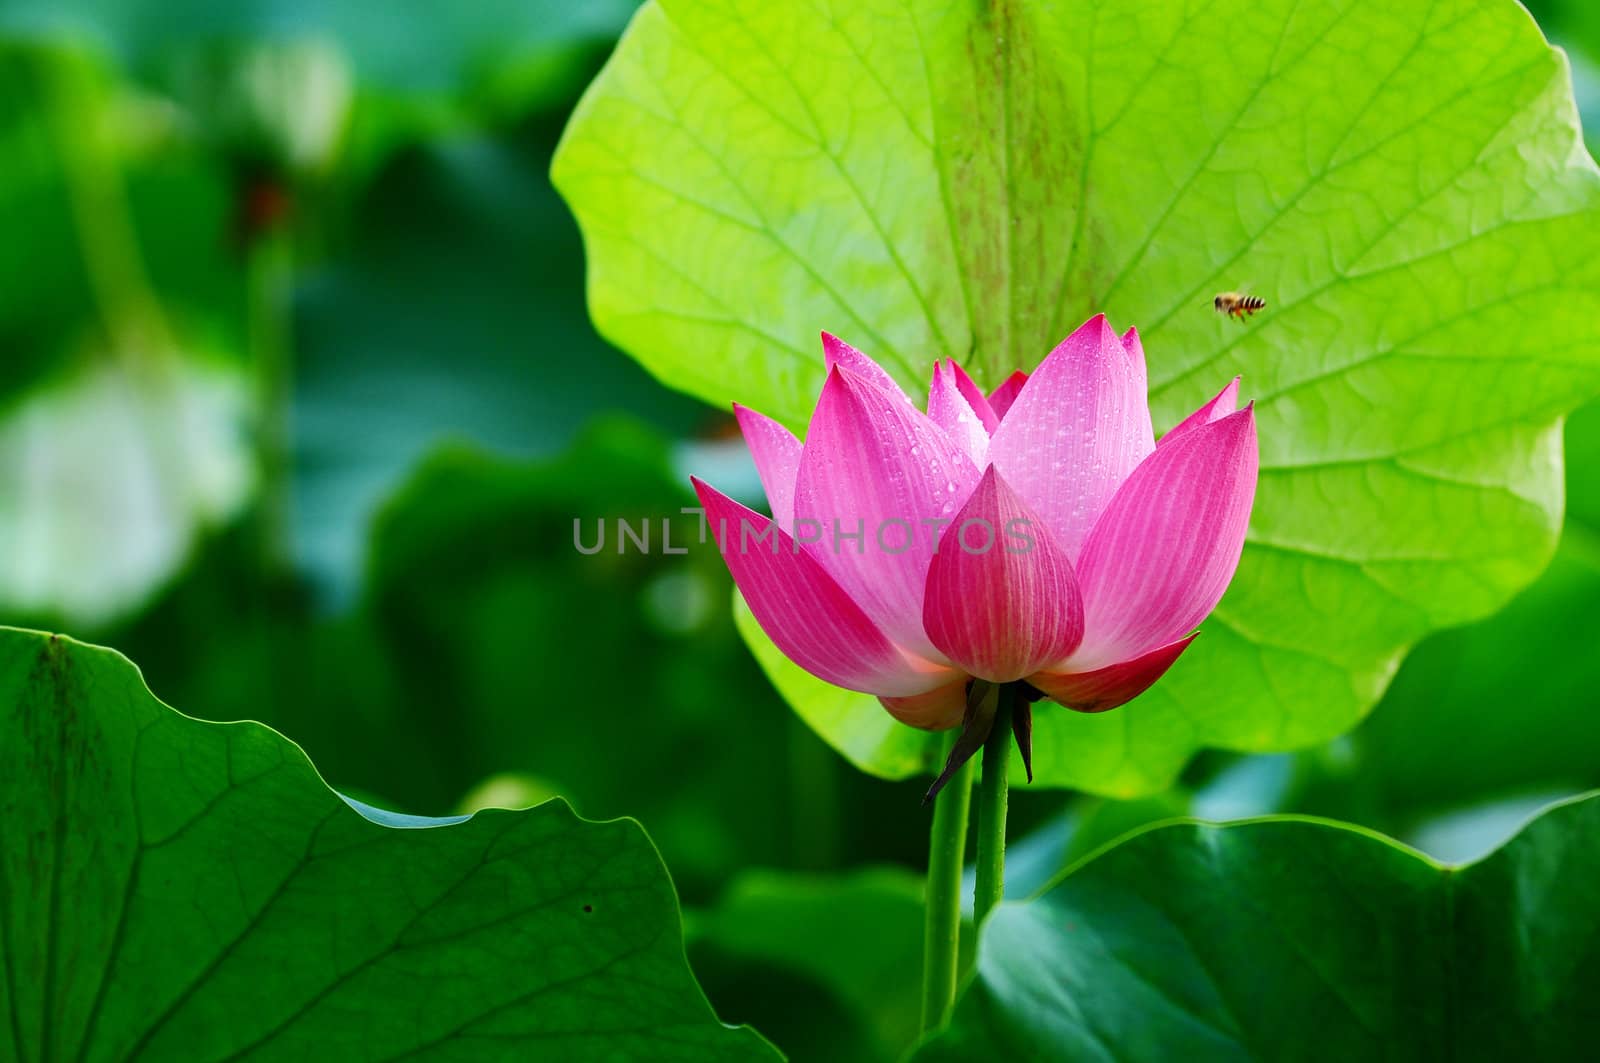 Lotus flower blooming in pond by bbbar